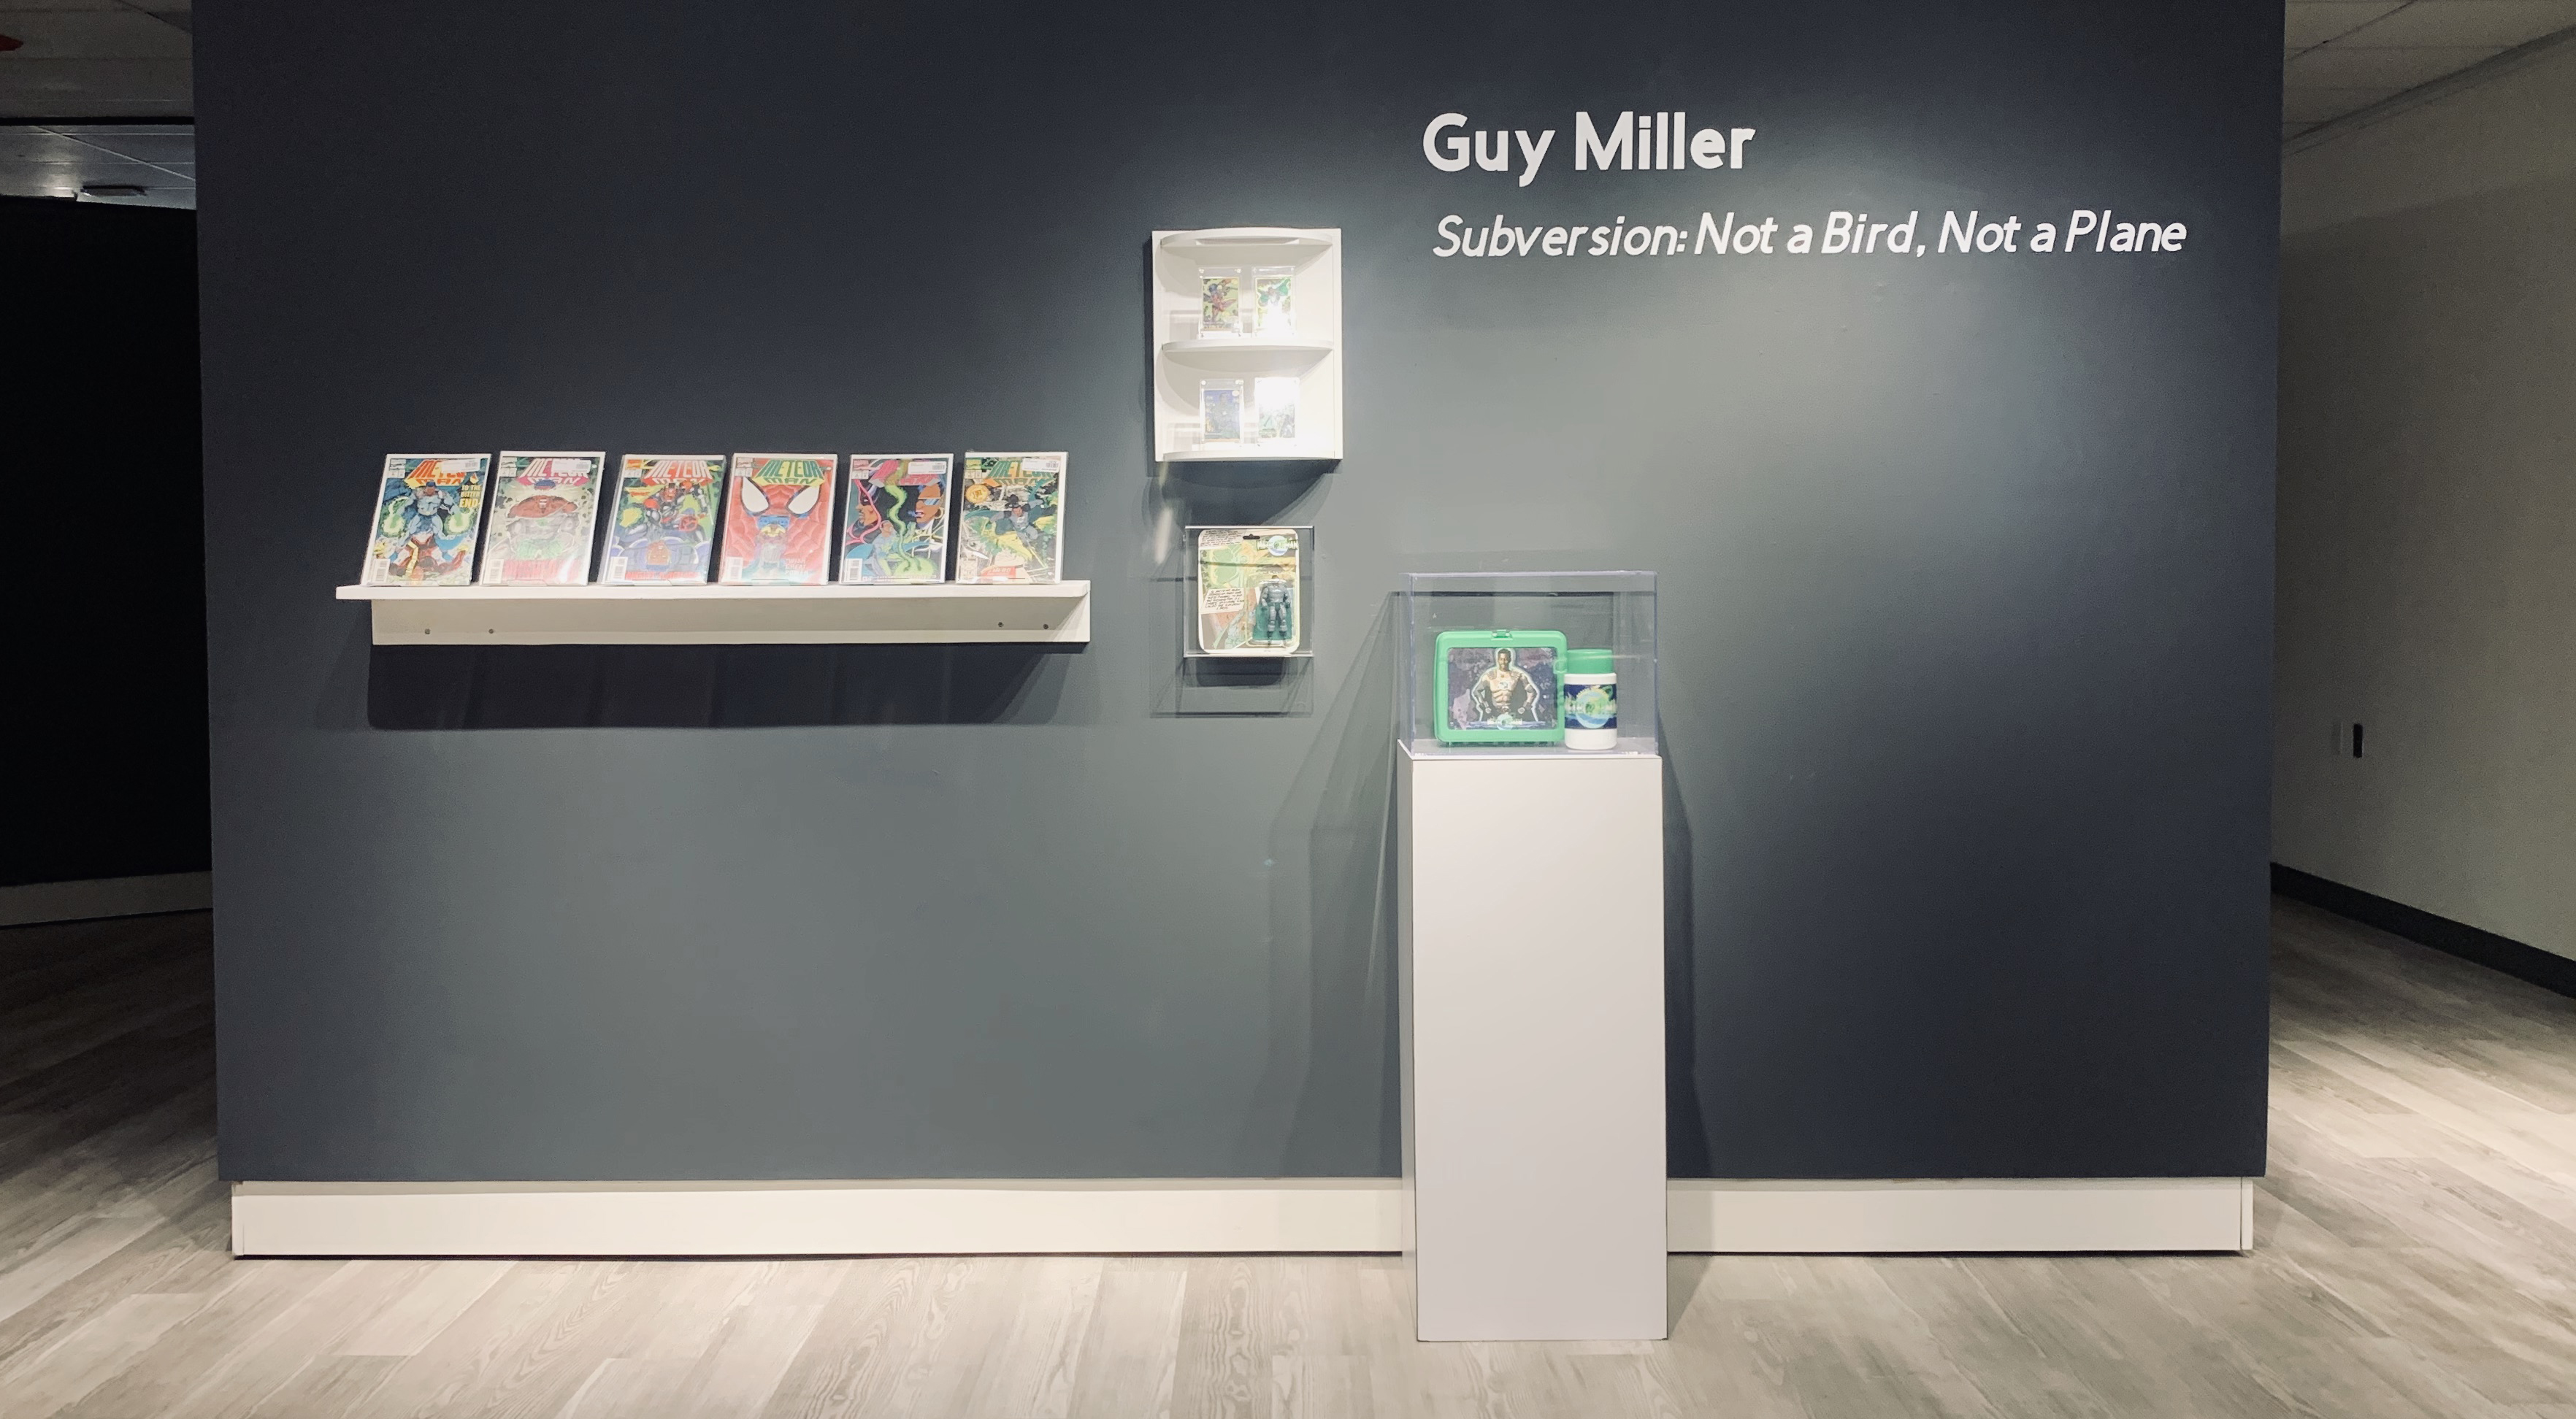 The pictured works and others of University alumnus Guy Miller can be viewed online in a virtual exhibition by the Del State Arts Center/Gallery.